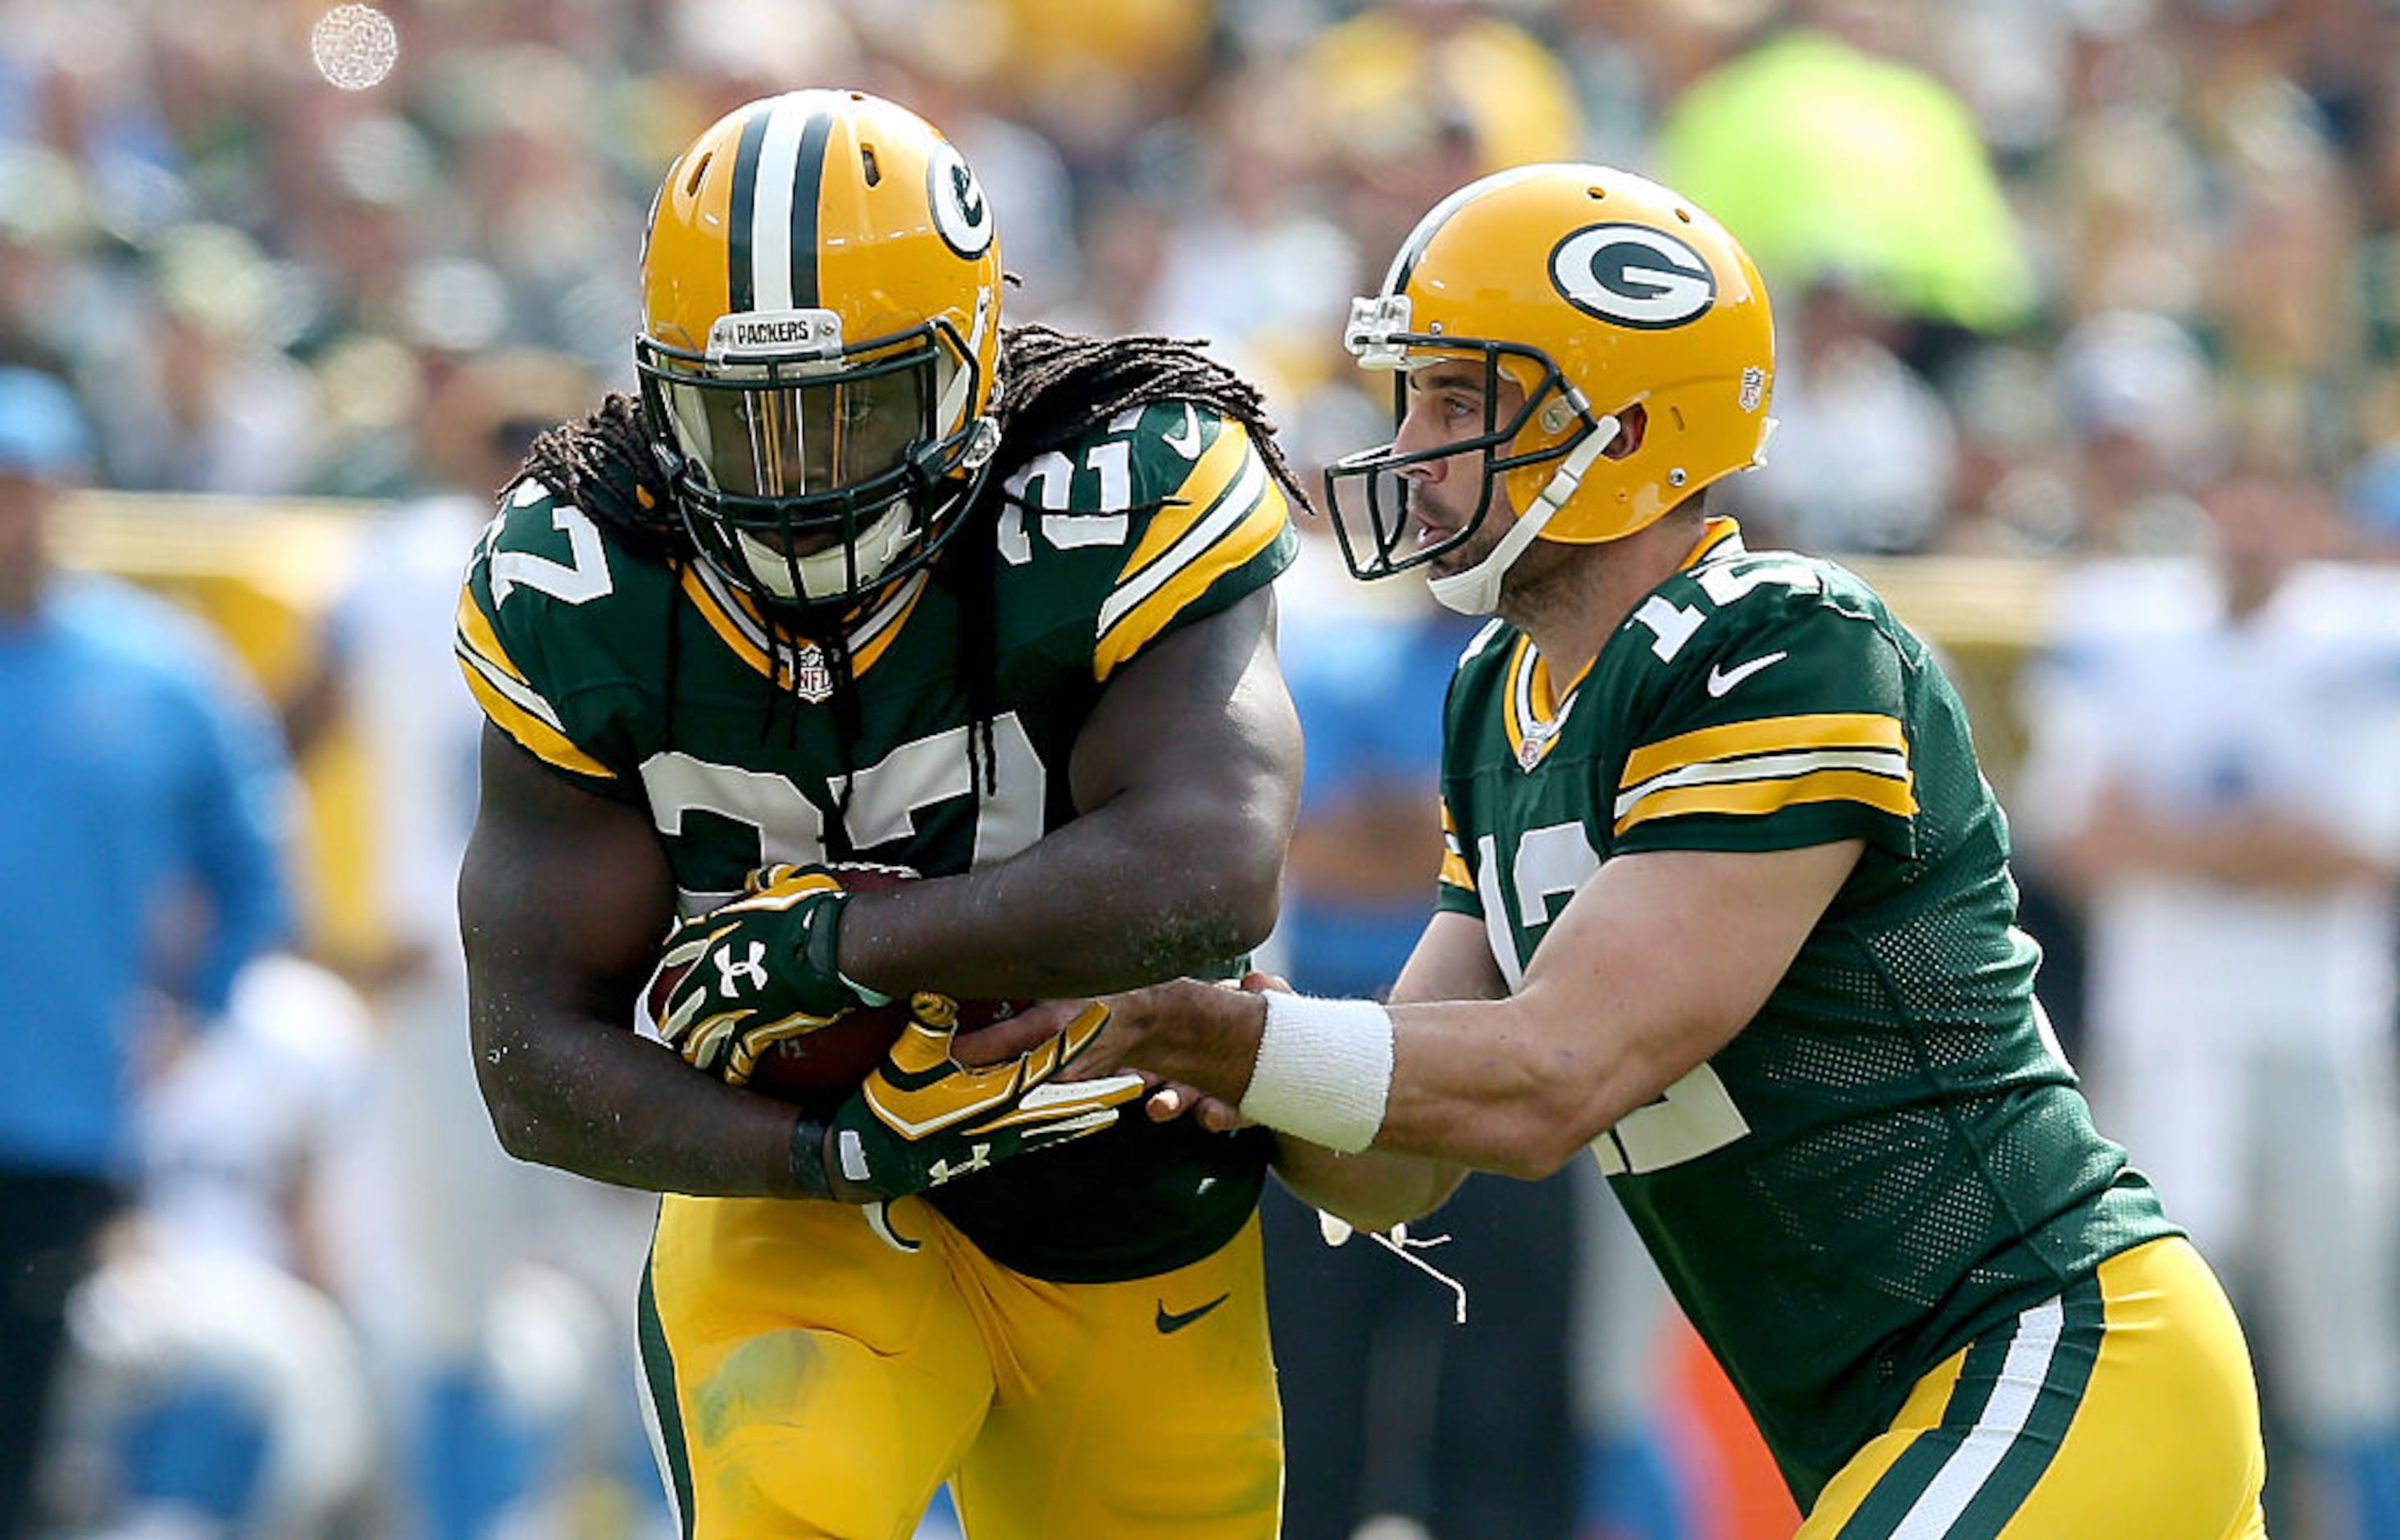 One-on-one with Eddie Lacy